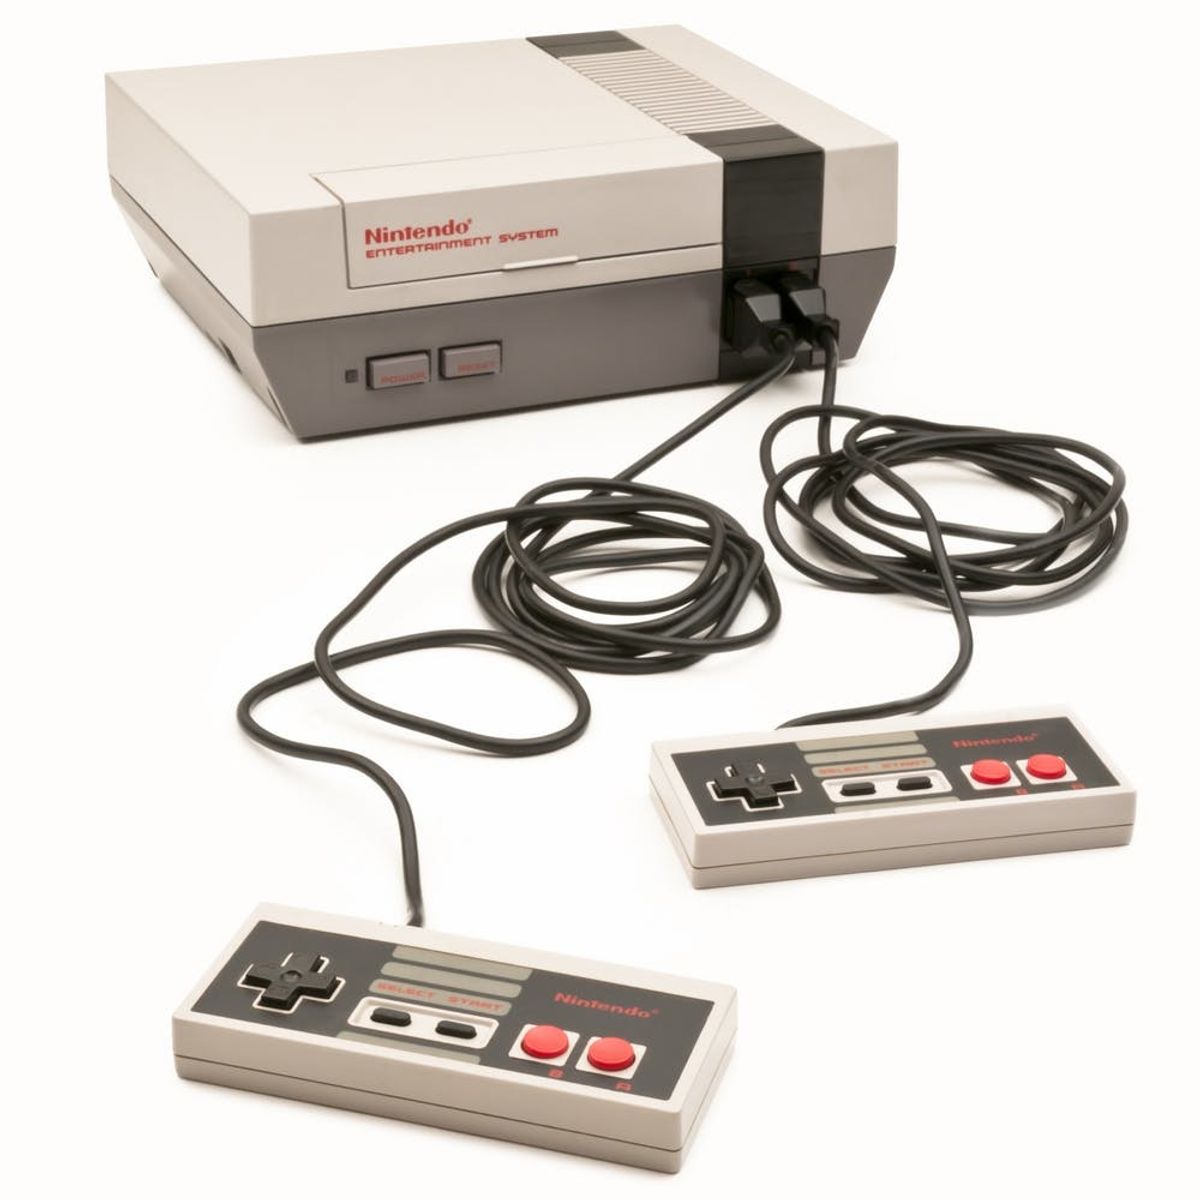 These 8 Nintendo NES Games Are Your Childhood in a Nutshell